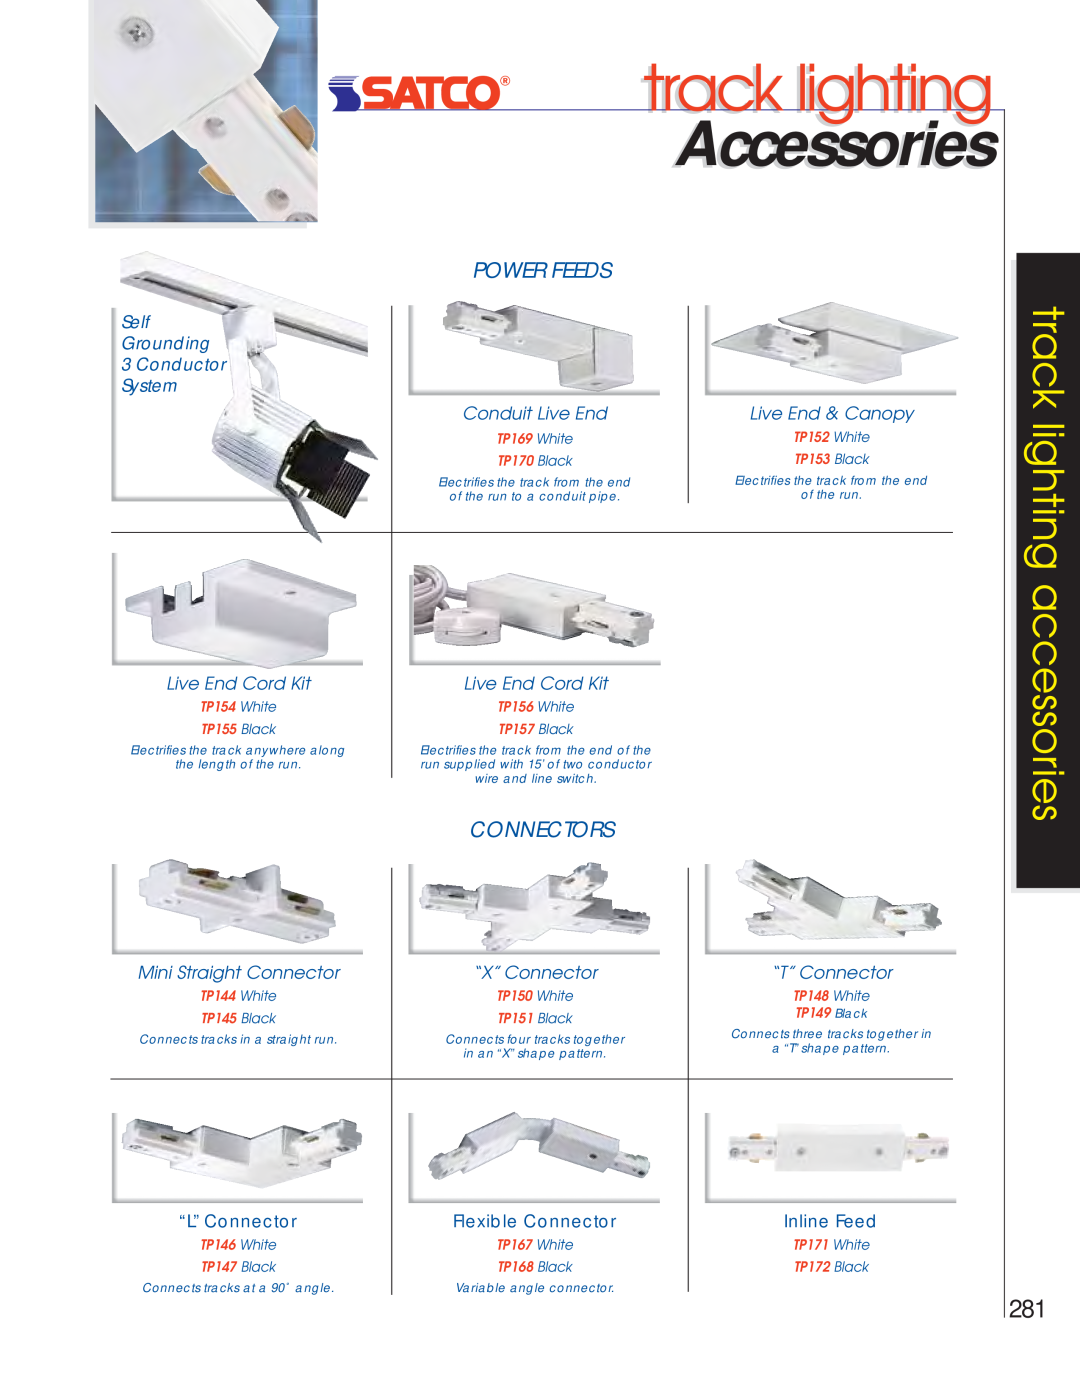 Satco Products R30 Soft Square Accessories, track lighting accessories, Power Feeds, Connectors, Conduit Live End 